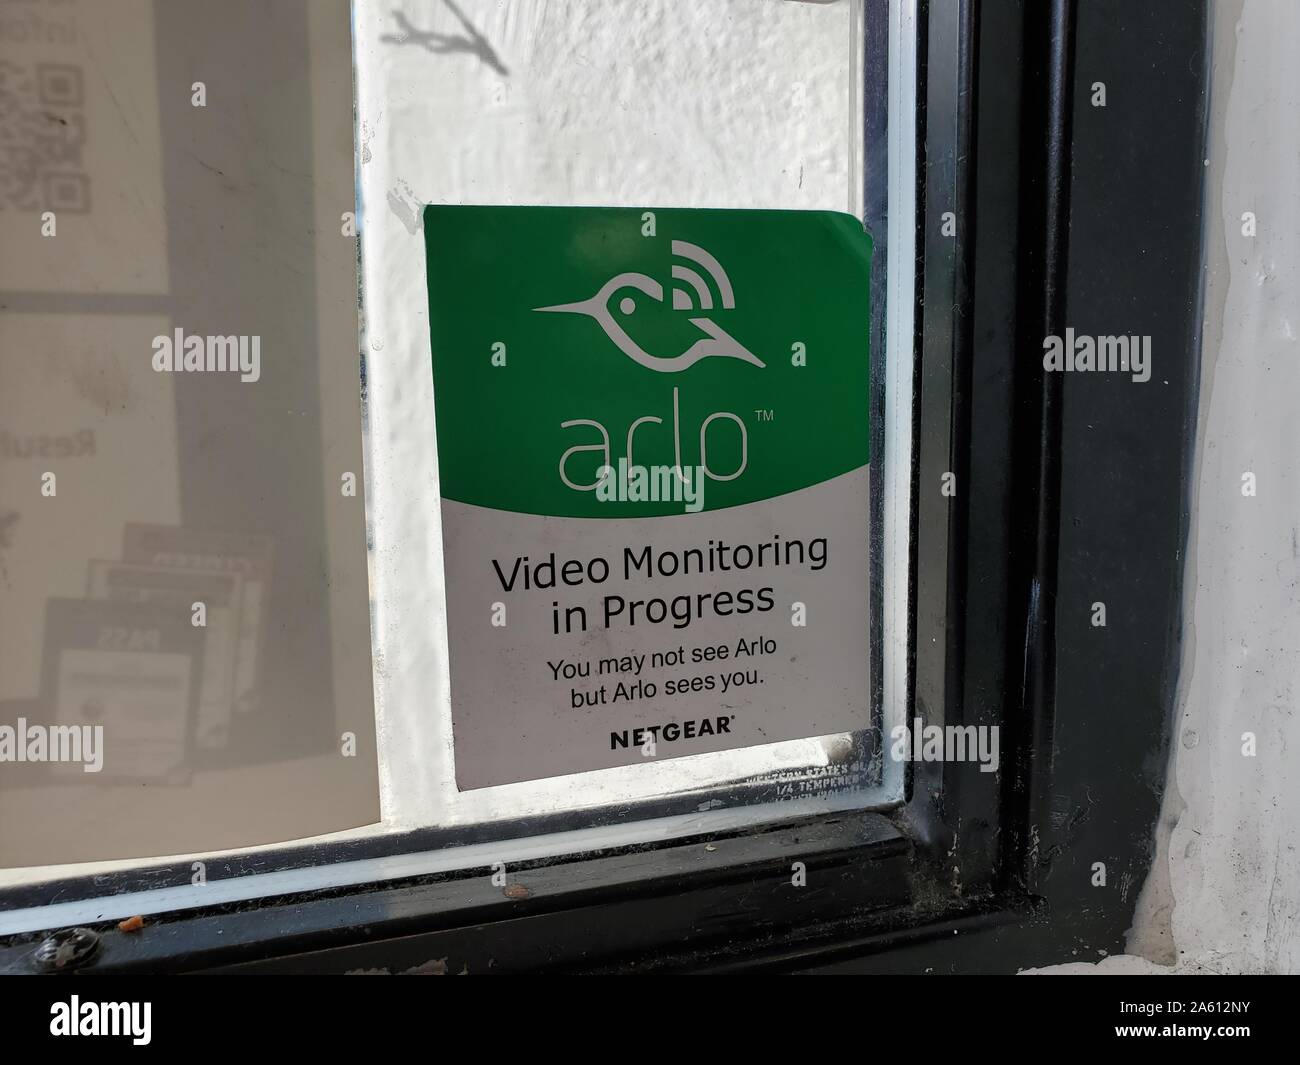 Close-up of window decal for Arlo web-enabled surveillance system from technology company Netgear in the window of a store in Walnut Creek, California, September 27, 2019. () Stock Photo